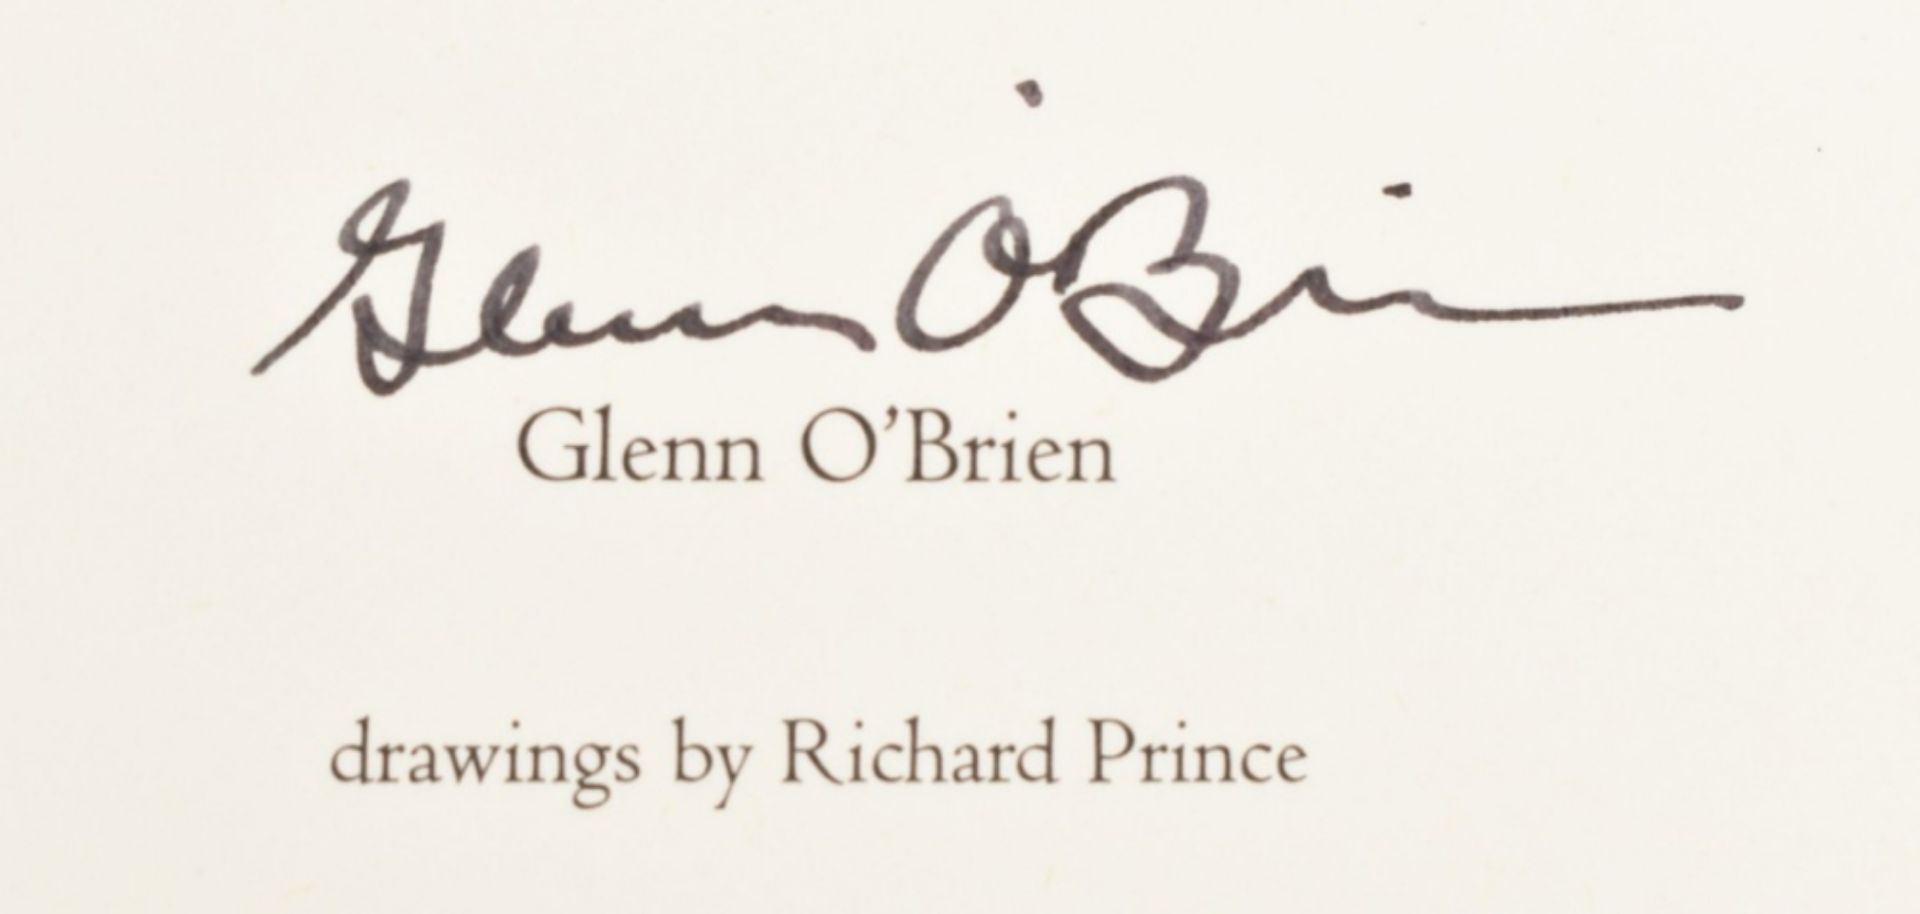 [s and up]  Richard Prince and Glenn O'Brien, Human Nature (Dub Version with signed print) - Image 7 of 9